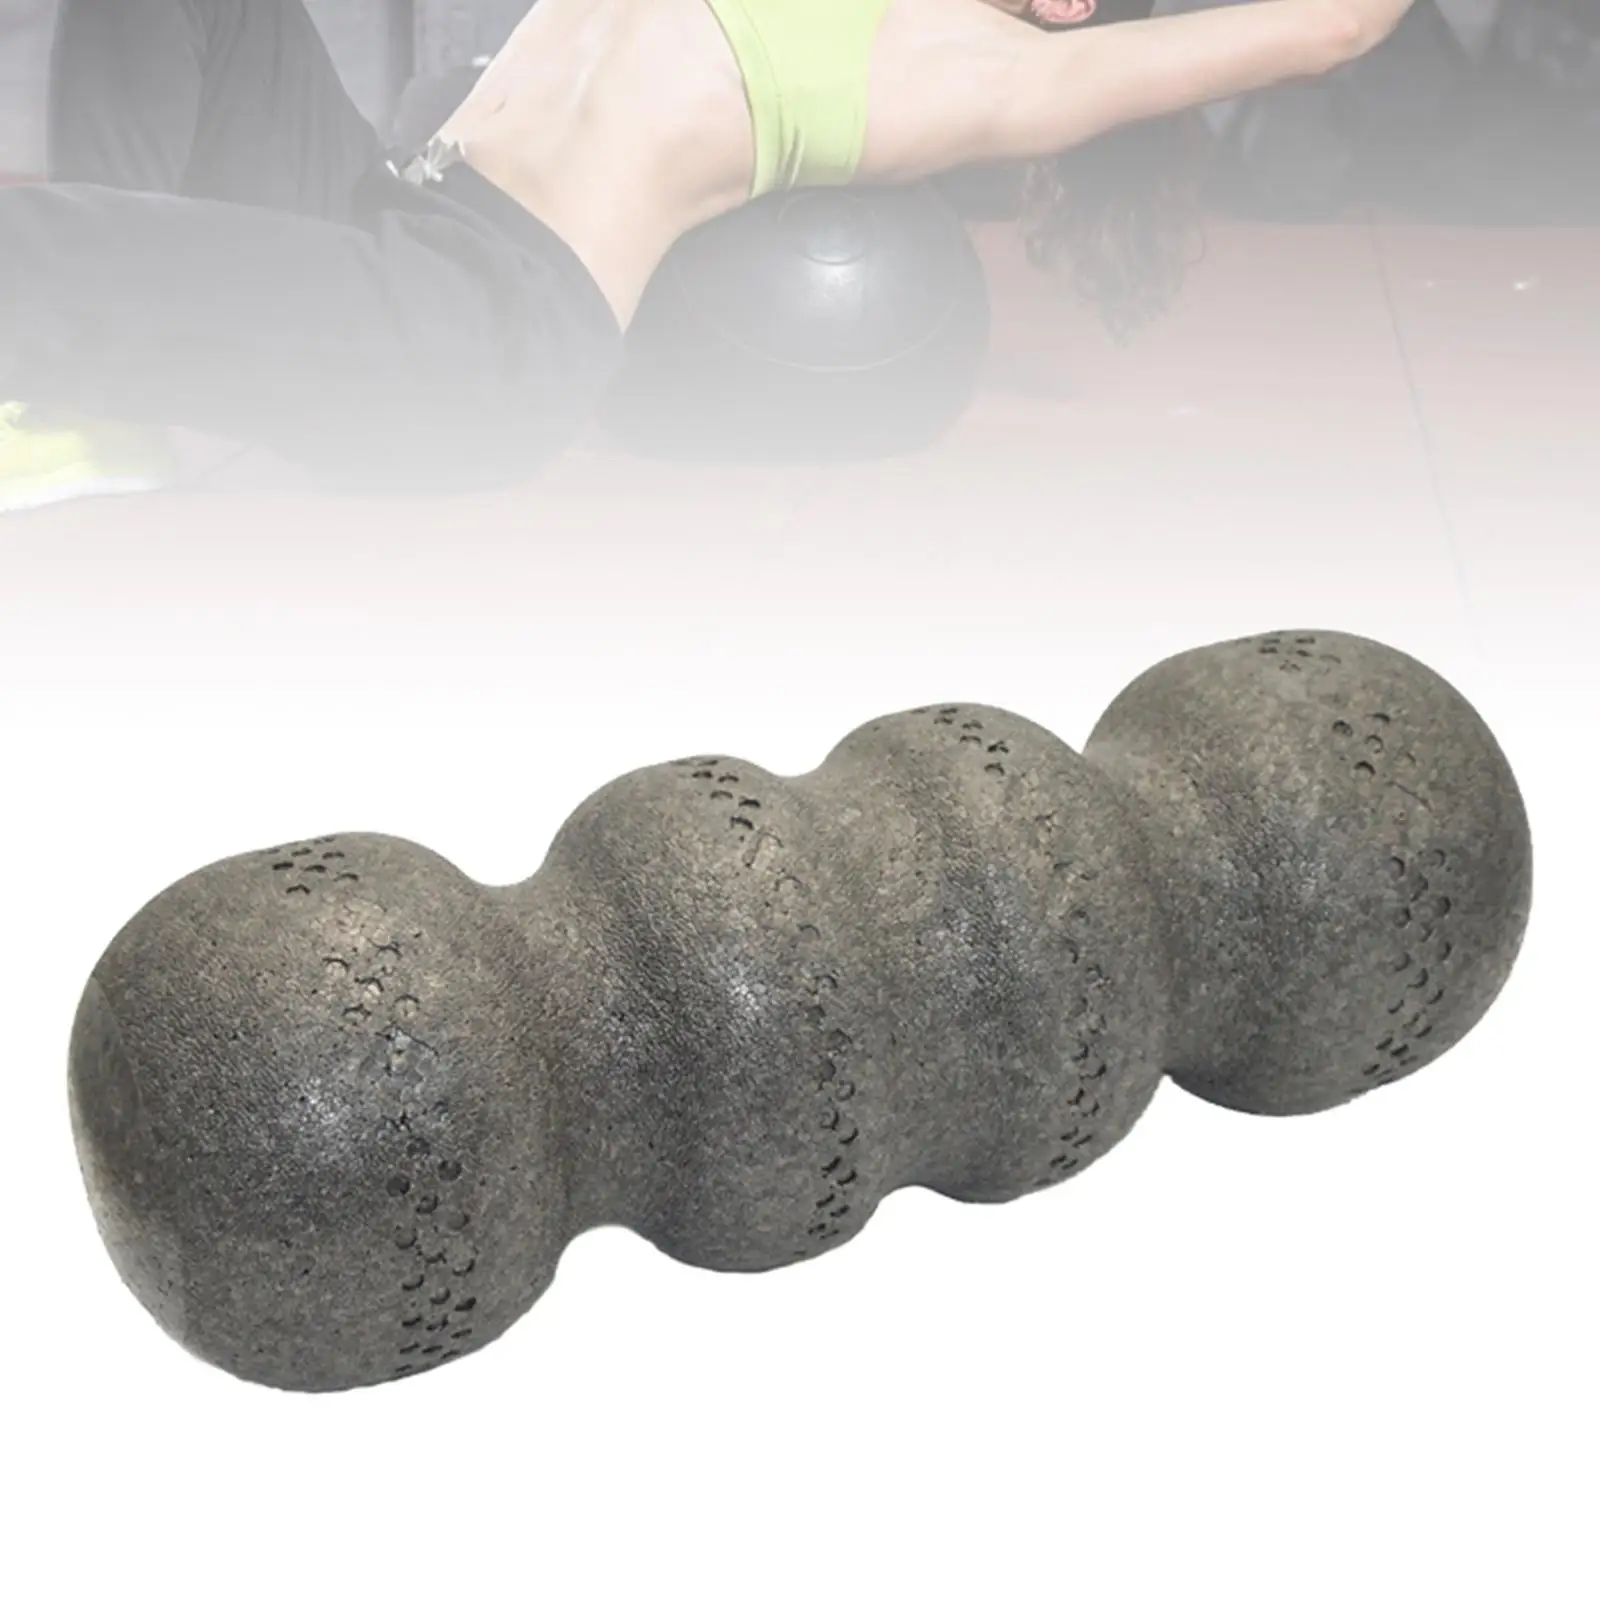 Ball Massage Release Exercise Fitness Stress Relief Tissue Tool Relax Exercise Fitness